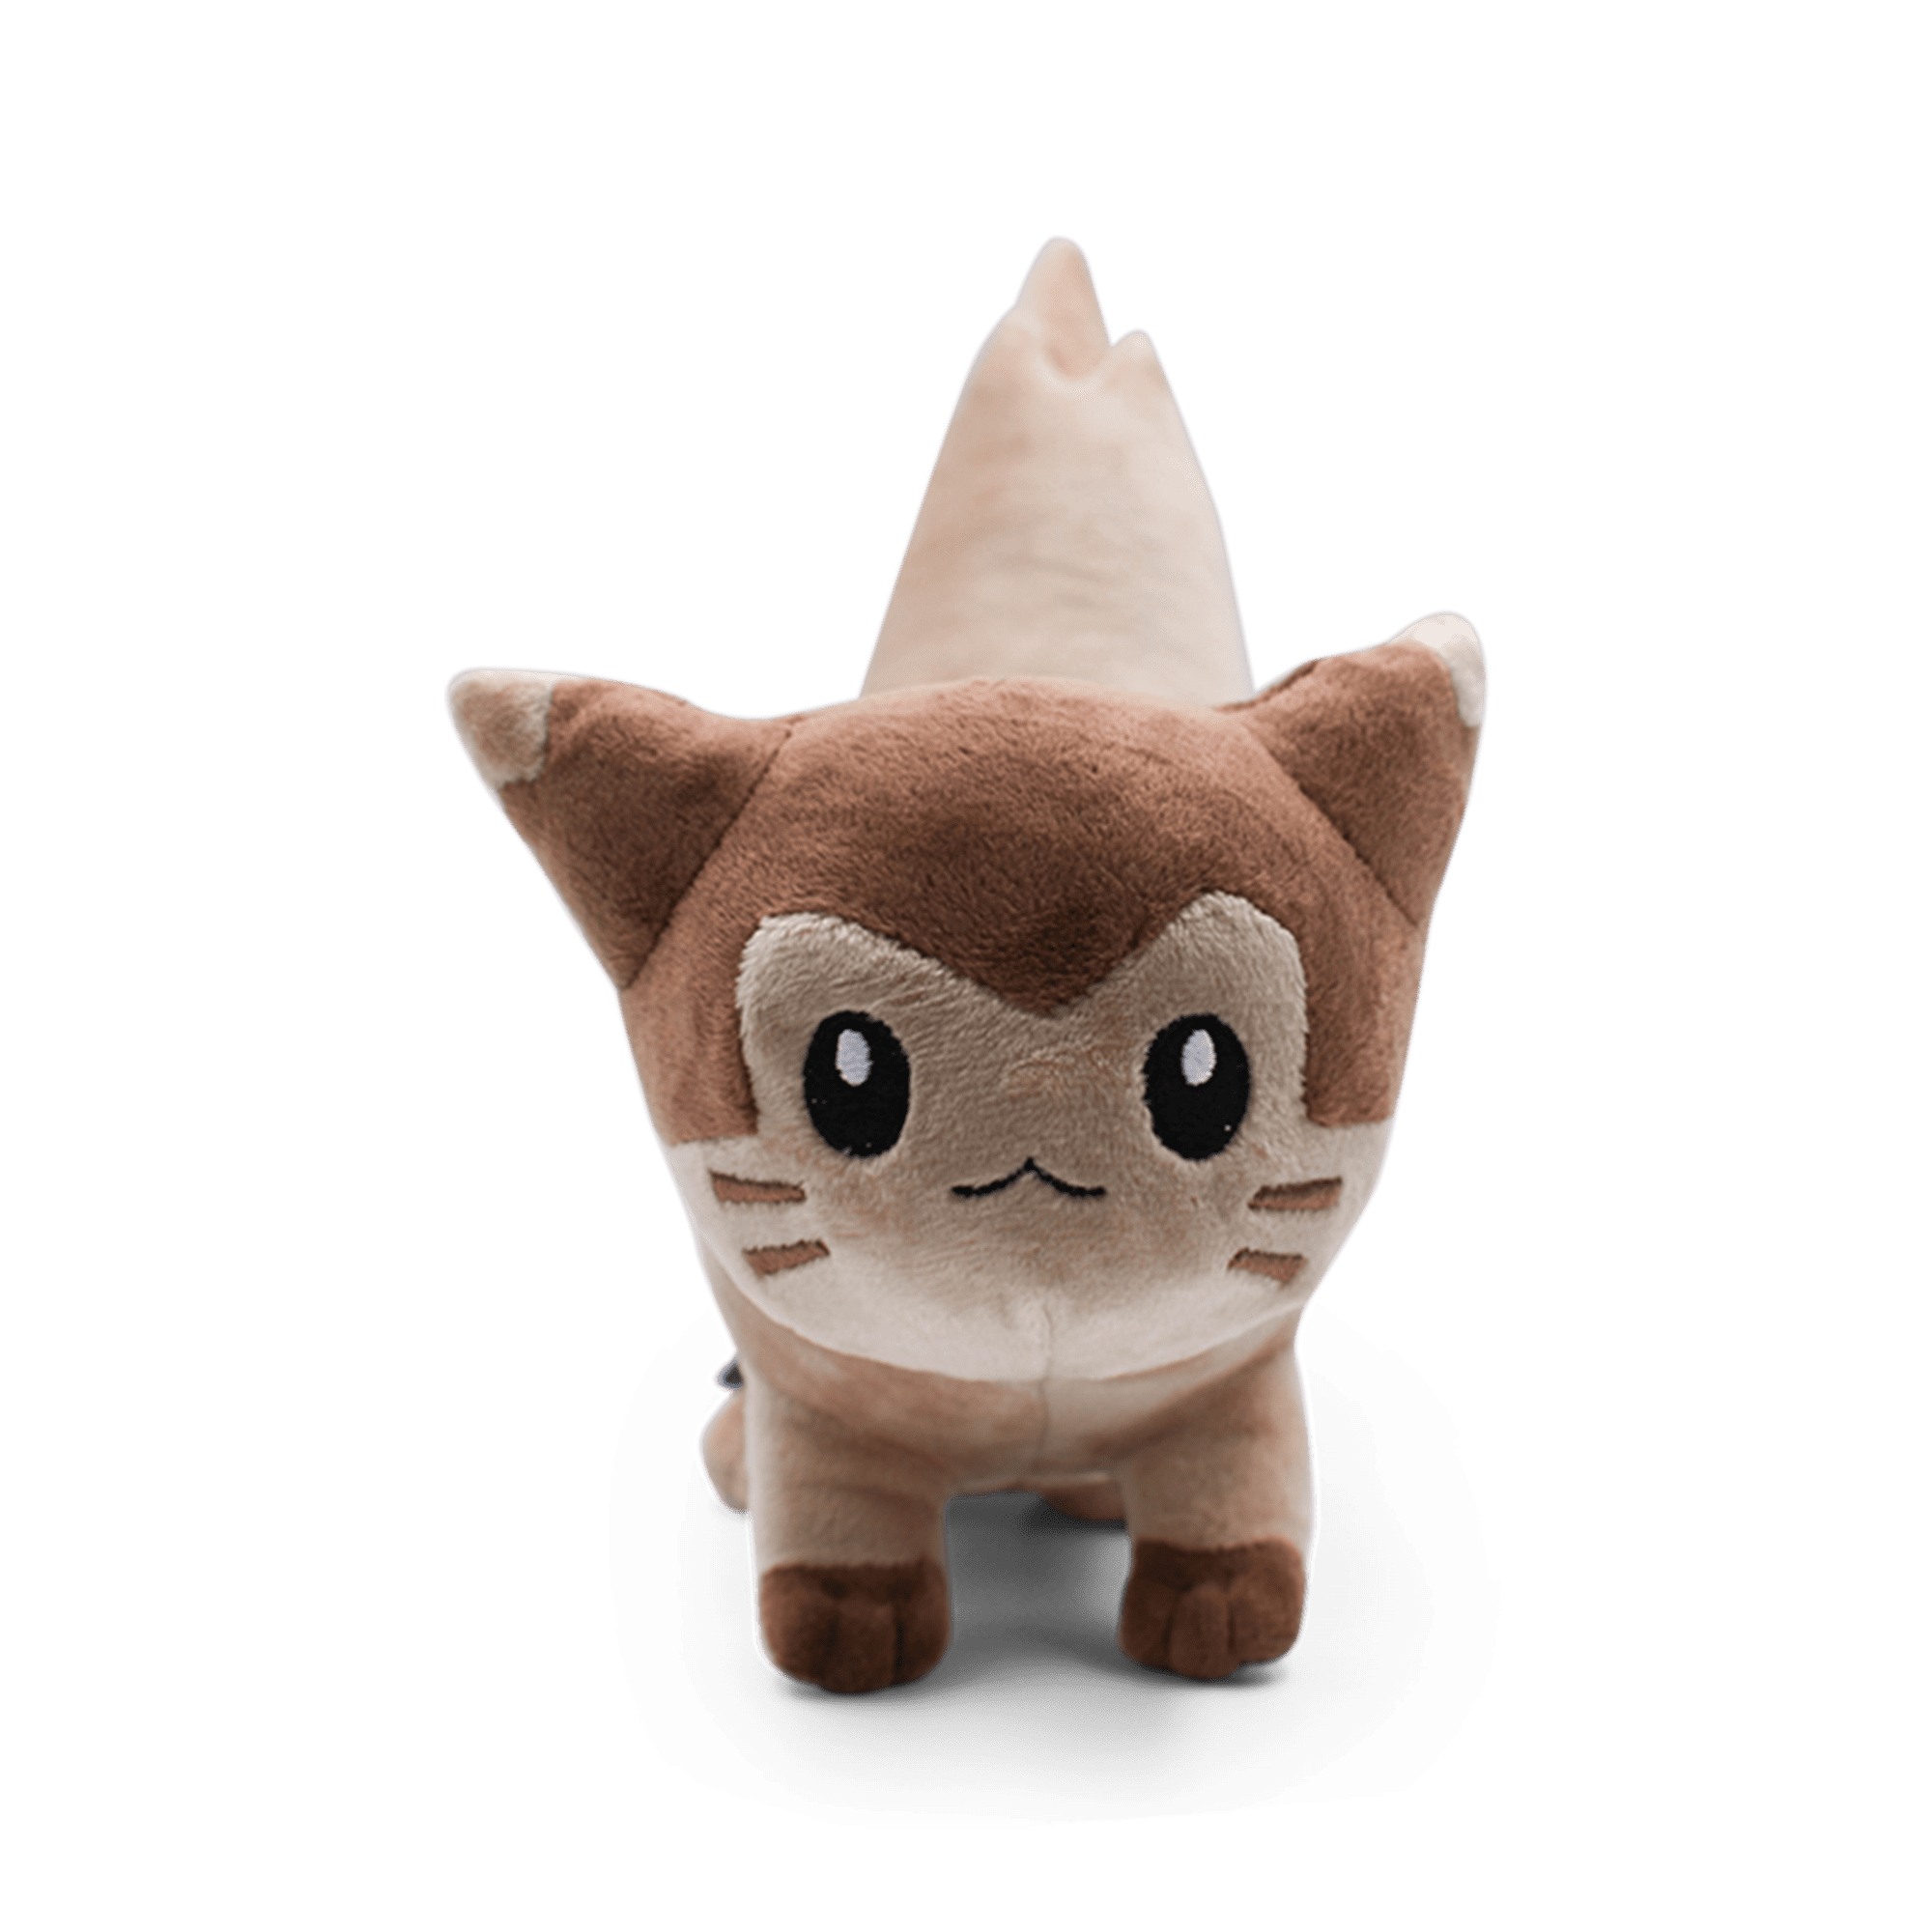 17 In Pokemon Center Long Furret Plush Toy Doll Stuffed Animals Collection Gift 